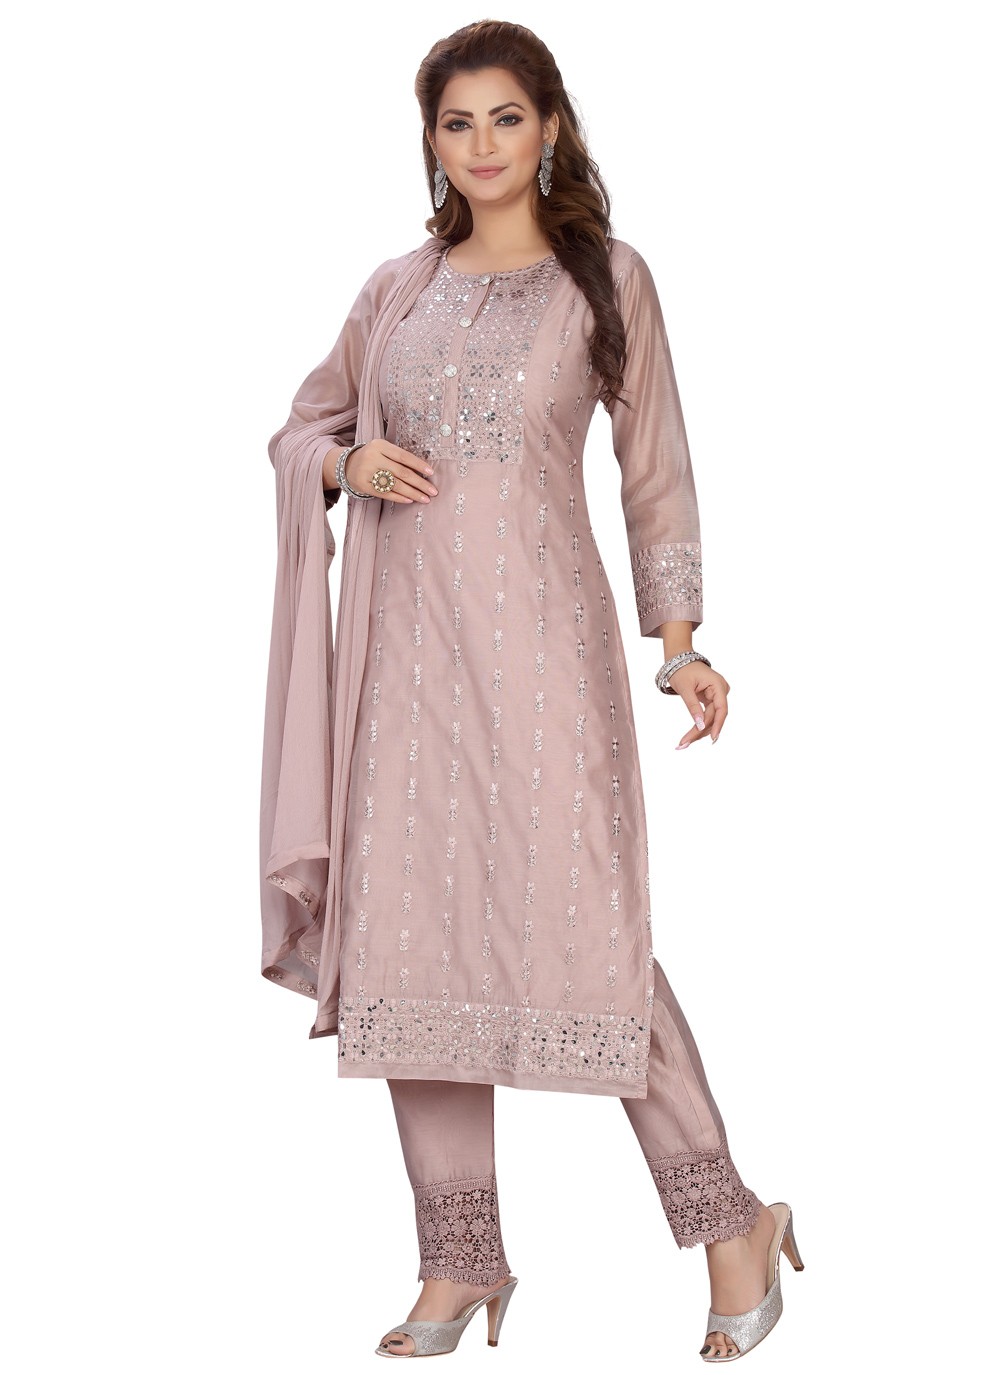 Chanderi Peach Embroidered Readymade Suit